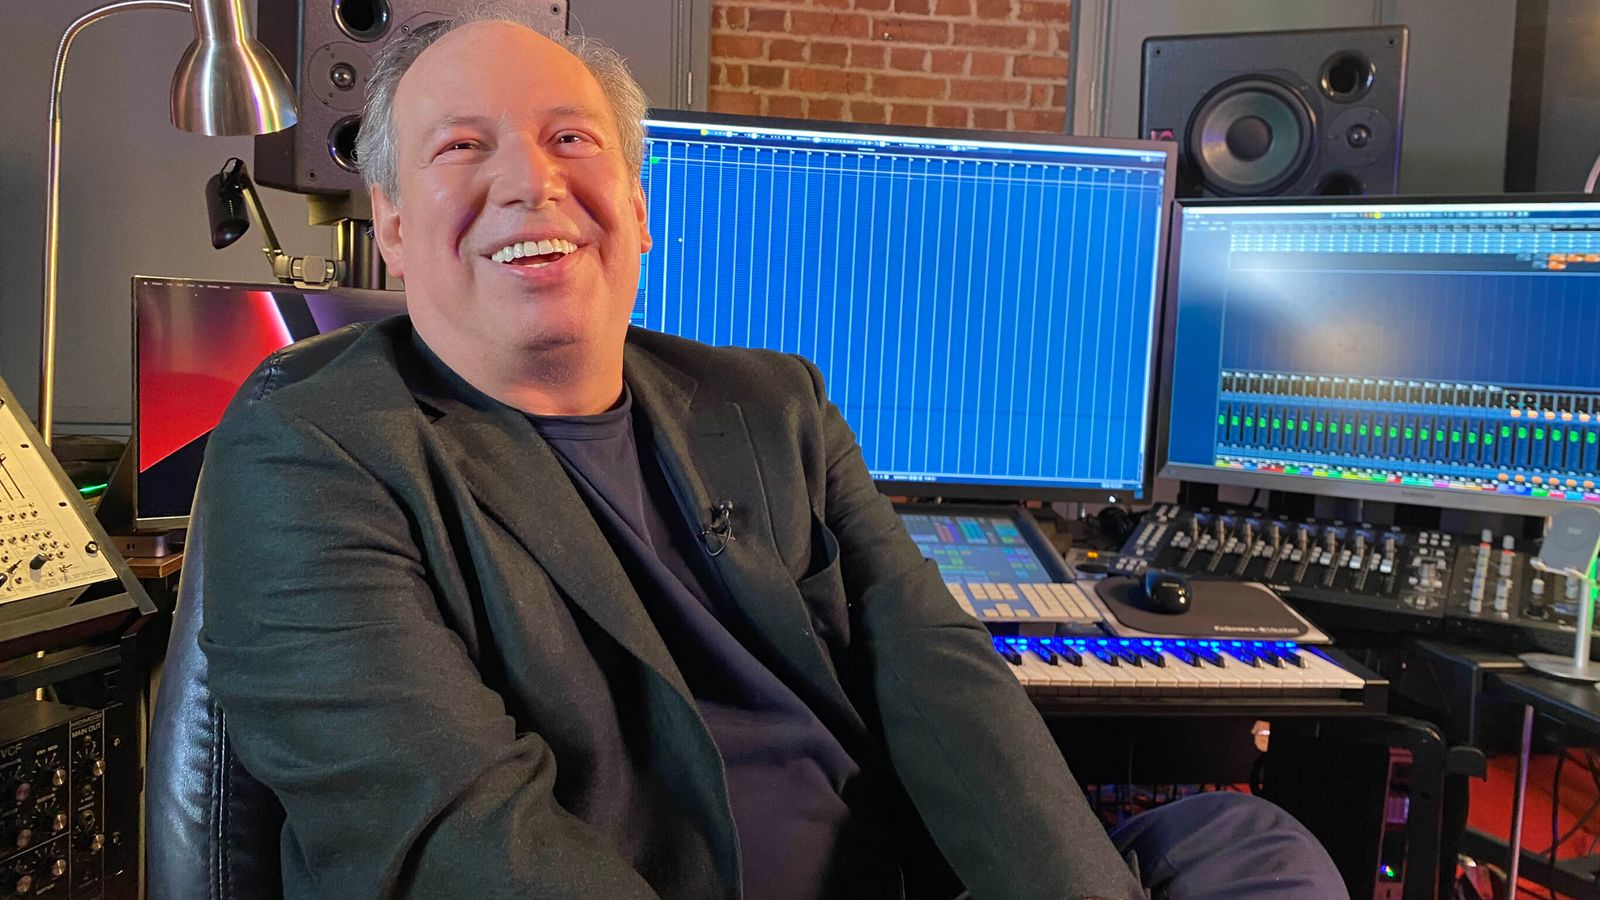 Hans Zimmer on 'cut-throat' Hollywood, Brexit 'bureaucracy' and protecting the planet